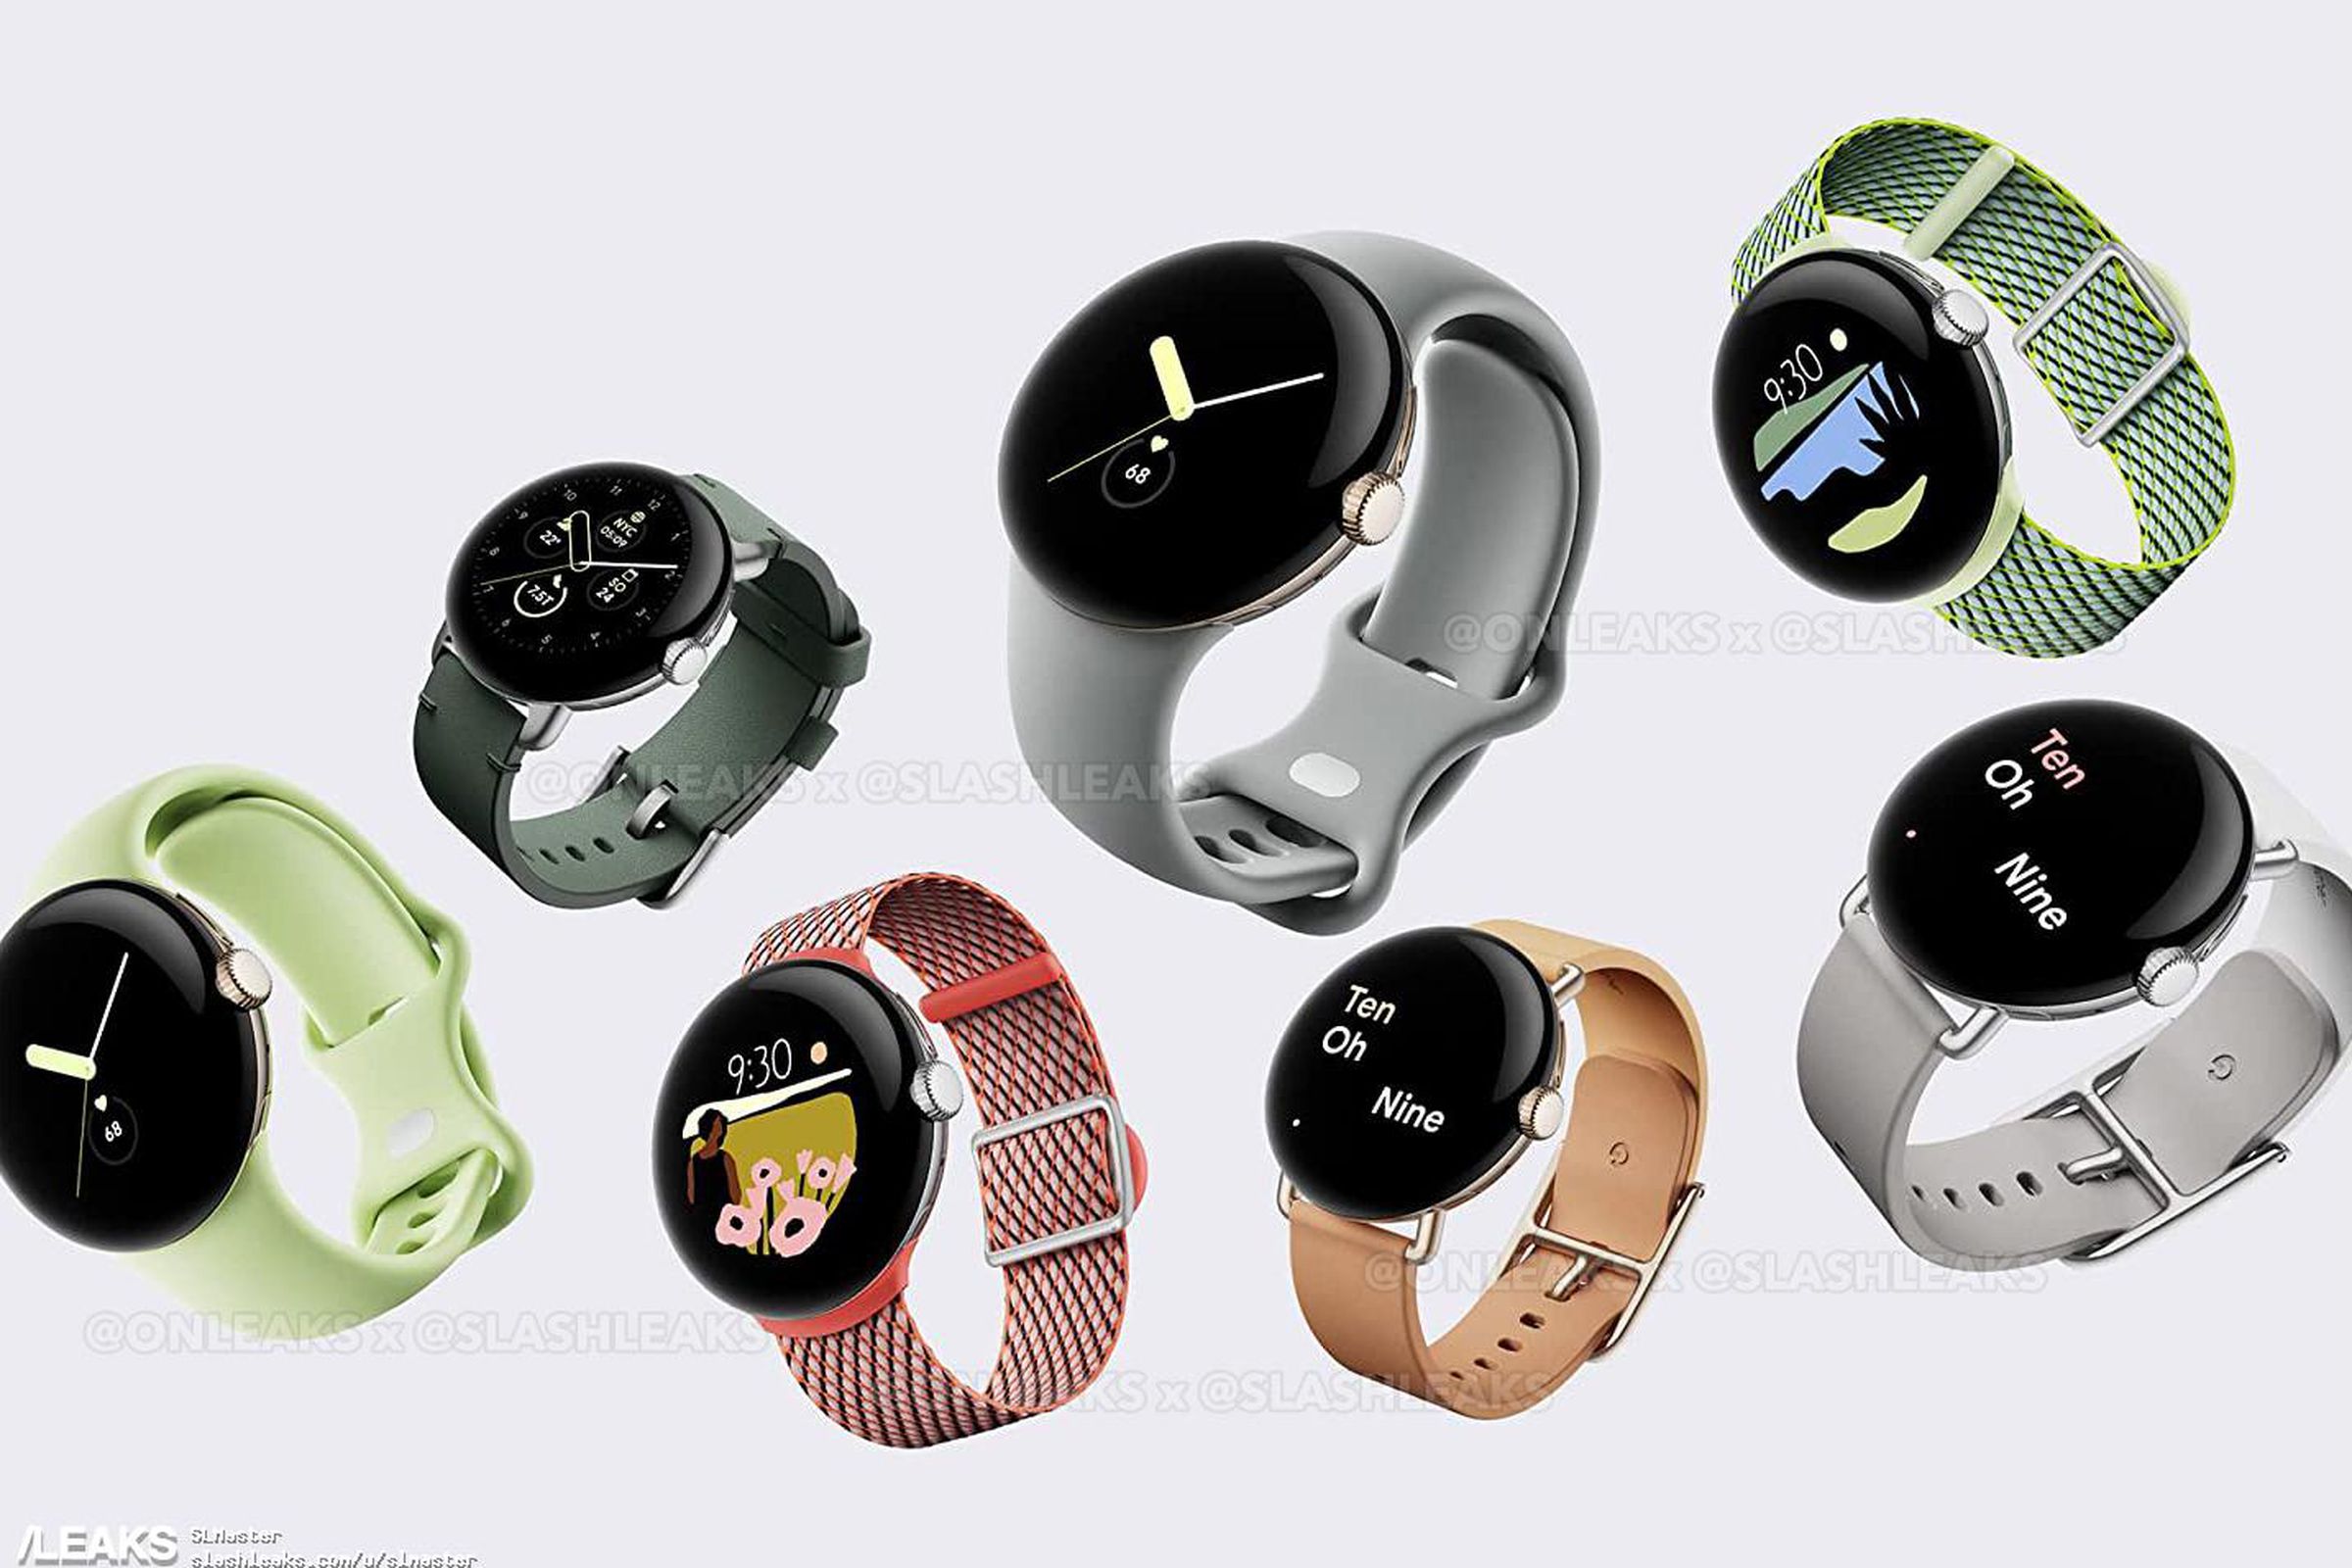 A leaked image showing a variety of Pixel Watches with different bands and watch faces